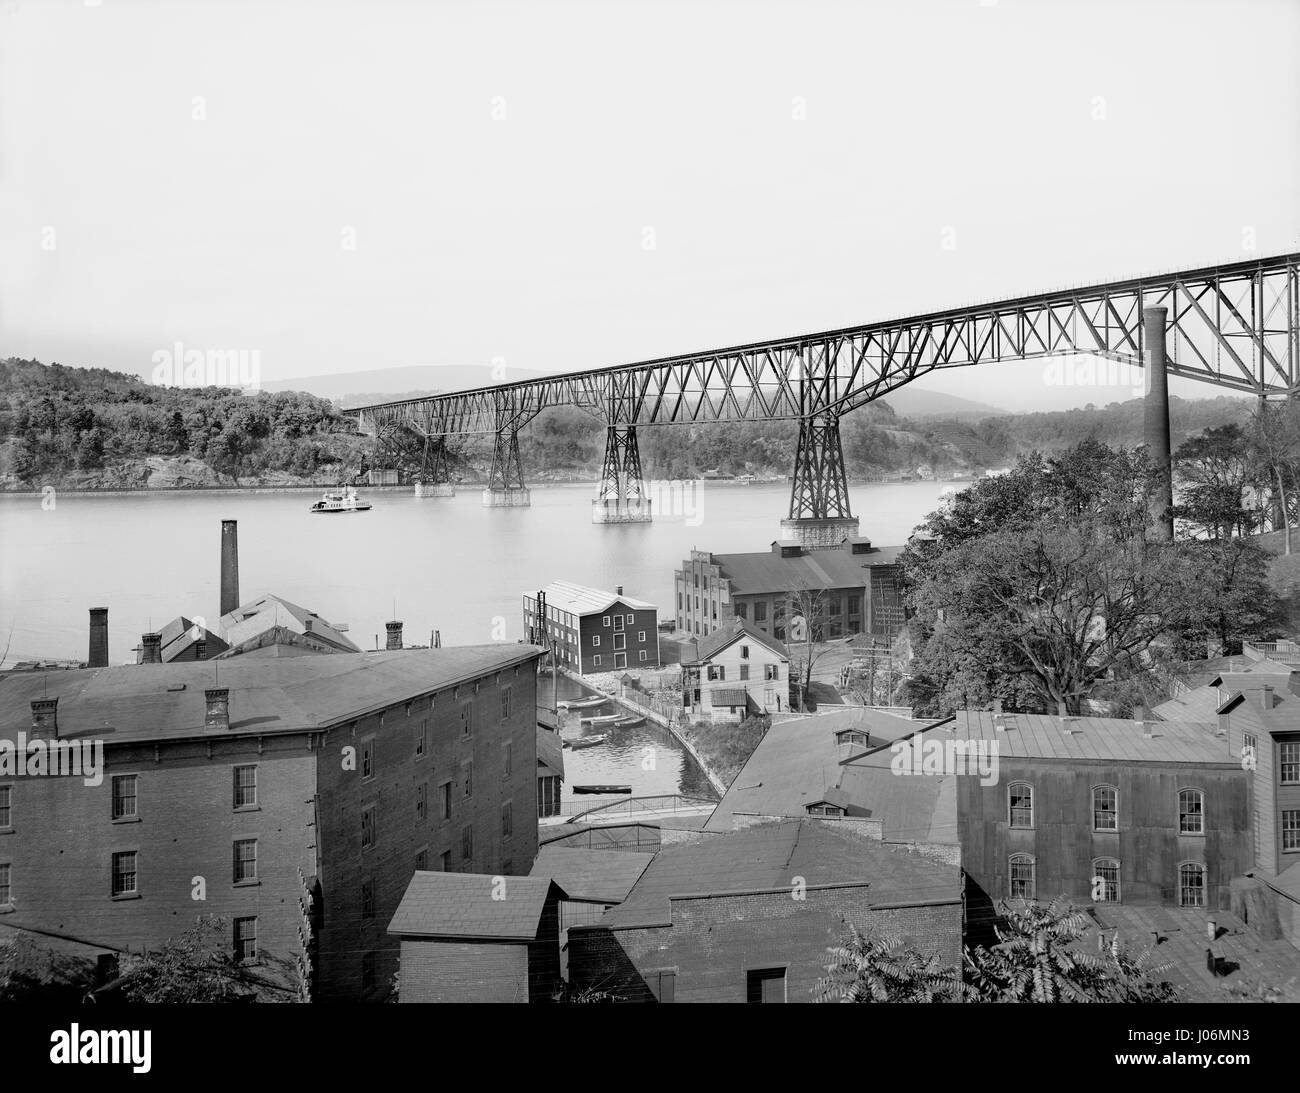 Village Buildings and High Bridge over Hudson River, Poughkeepsie to Highland, New York, USA, Detroit Publishing Company, 1900 Stock Photo